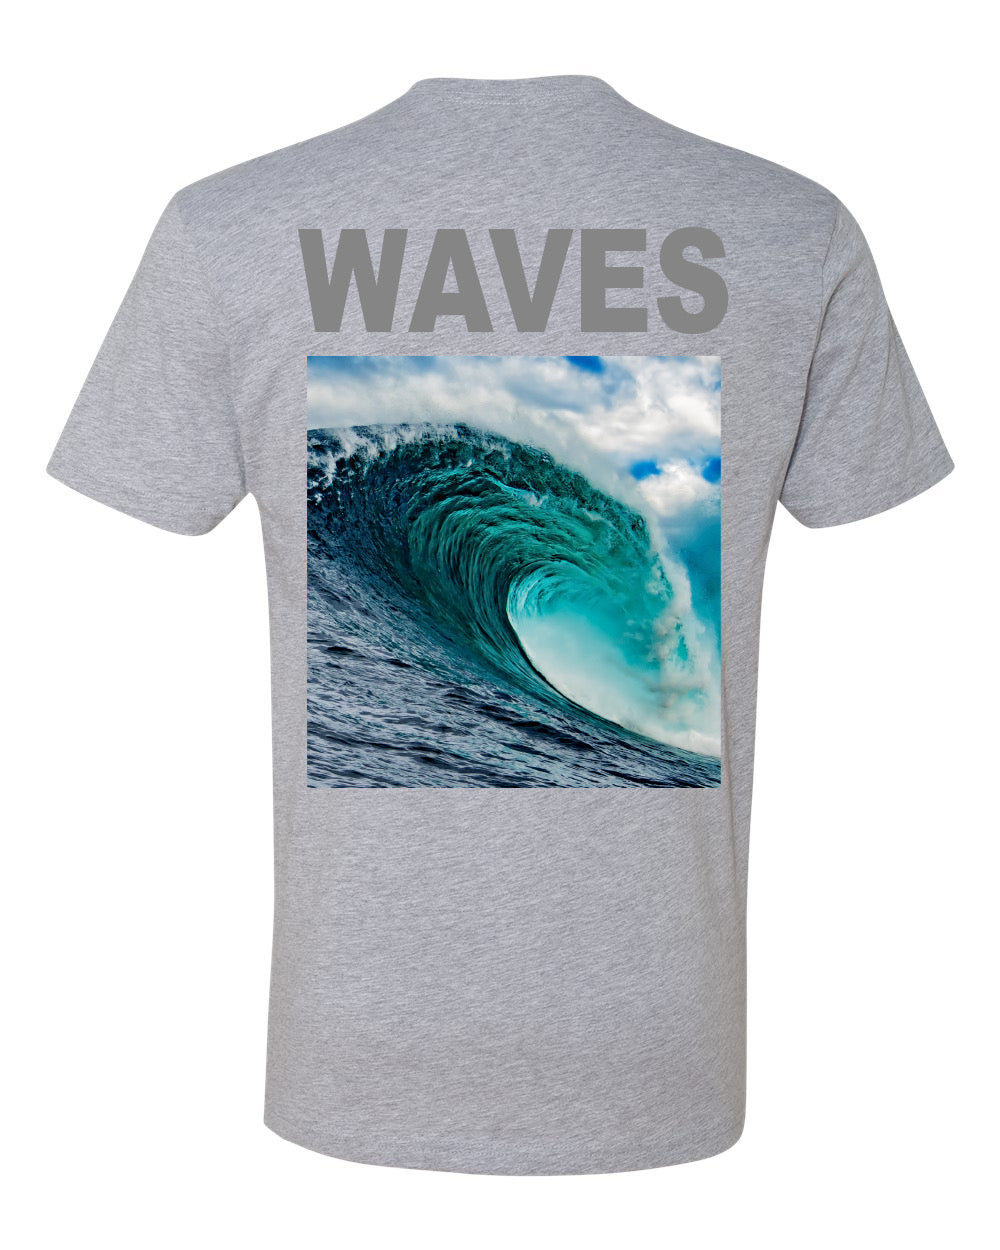 RIDE THE WAVE T-SHIRT 3M - GREY